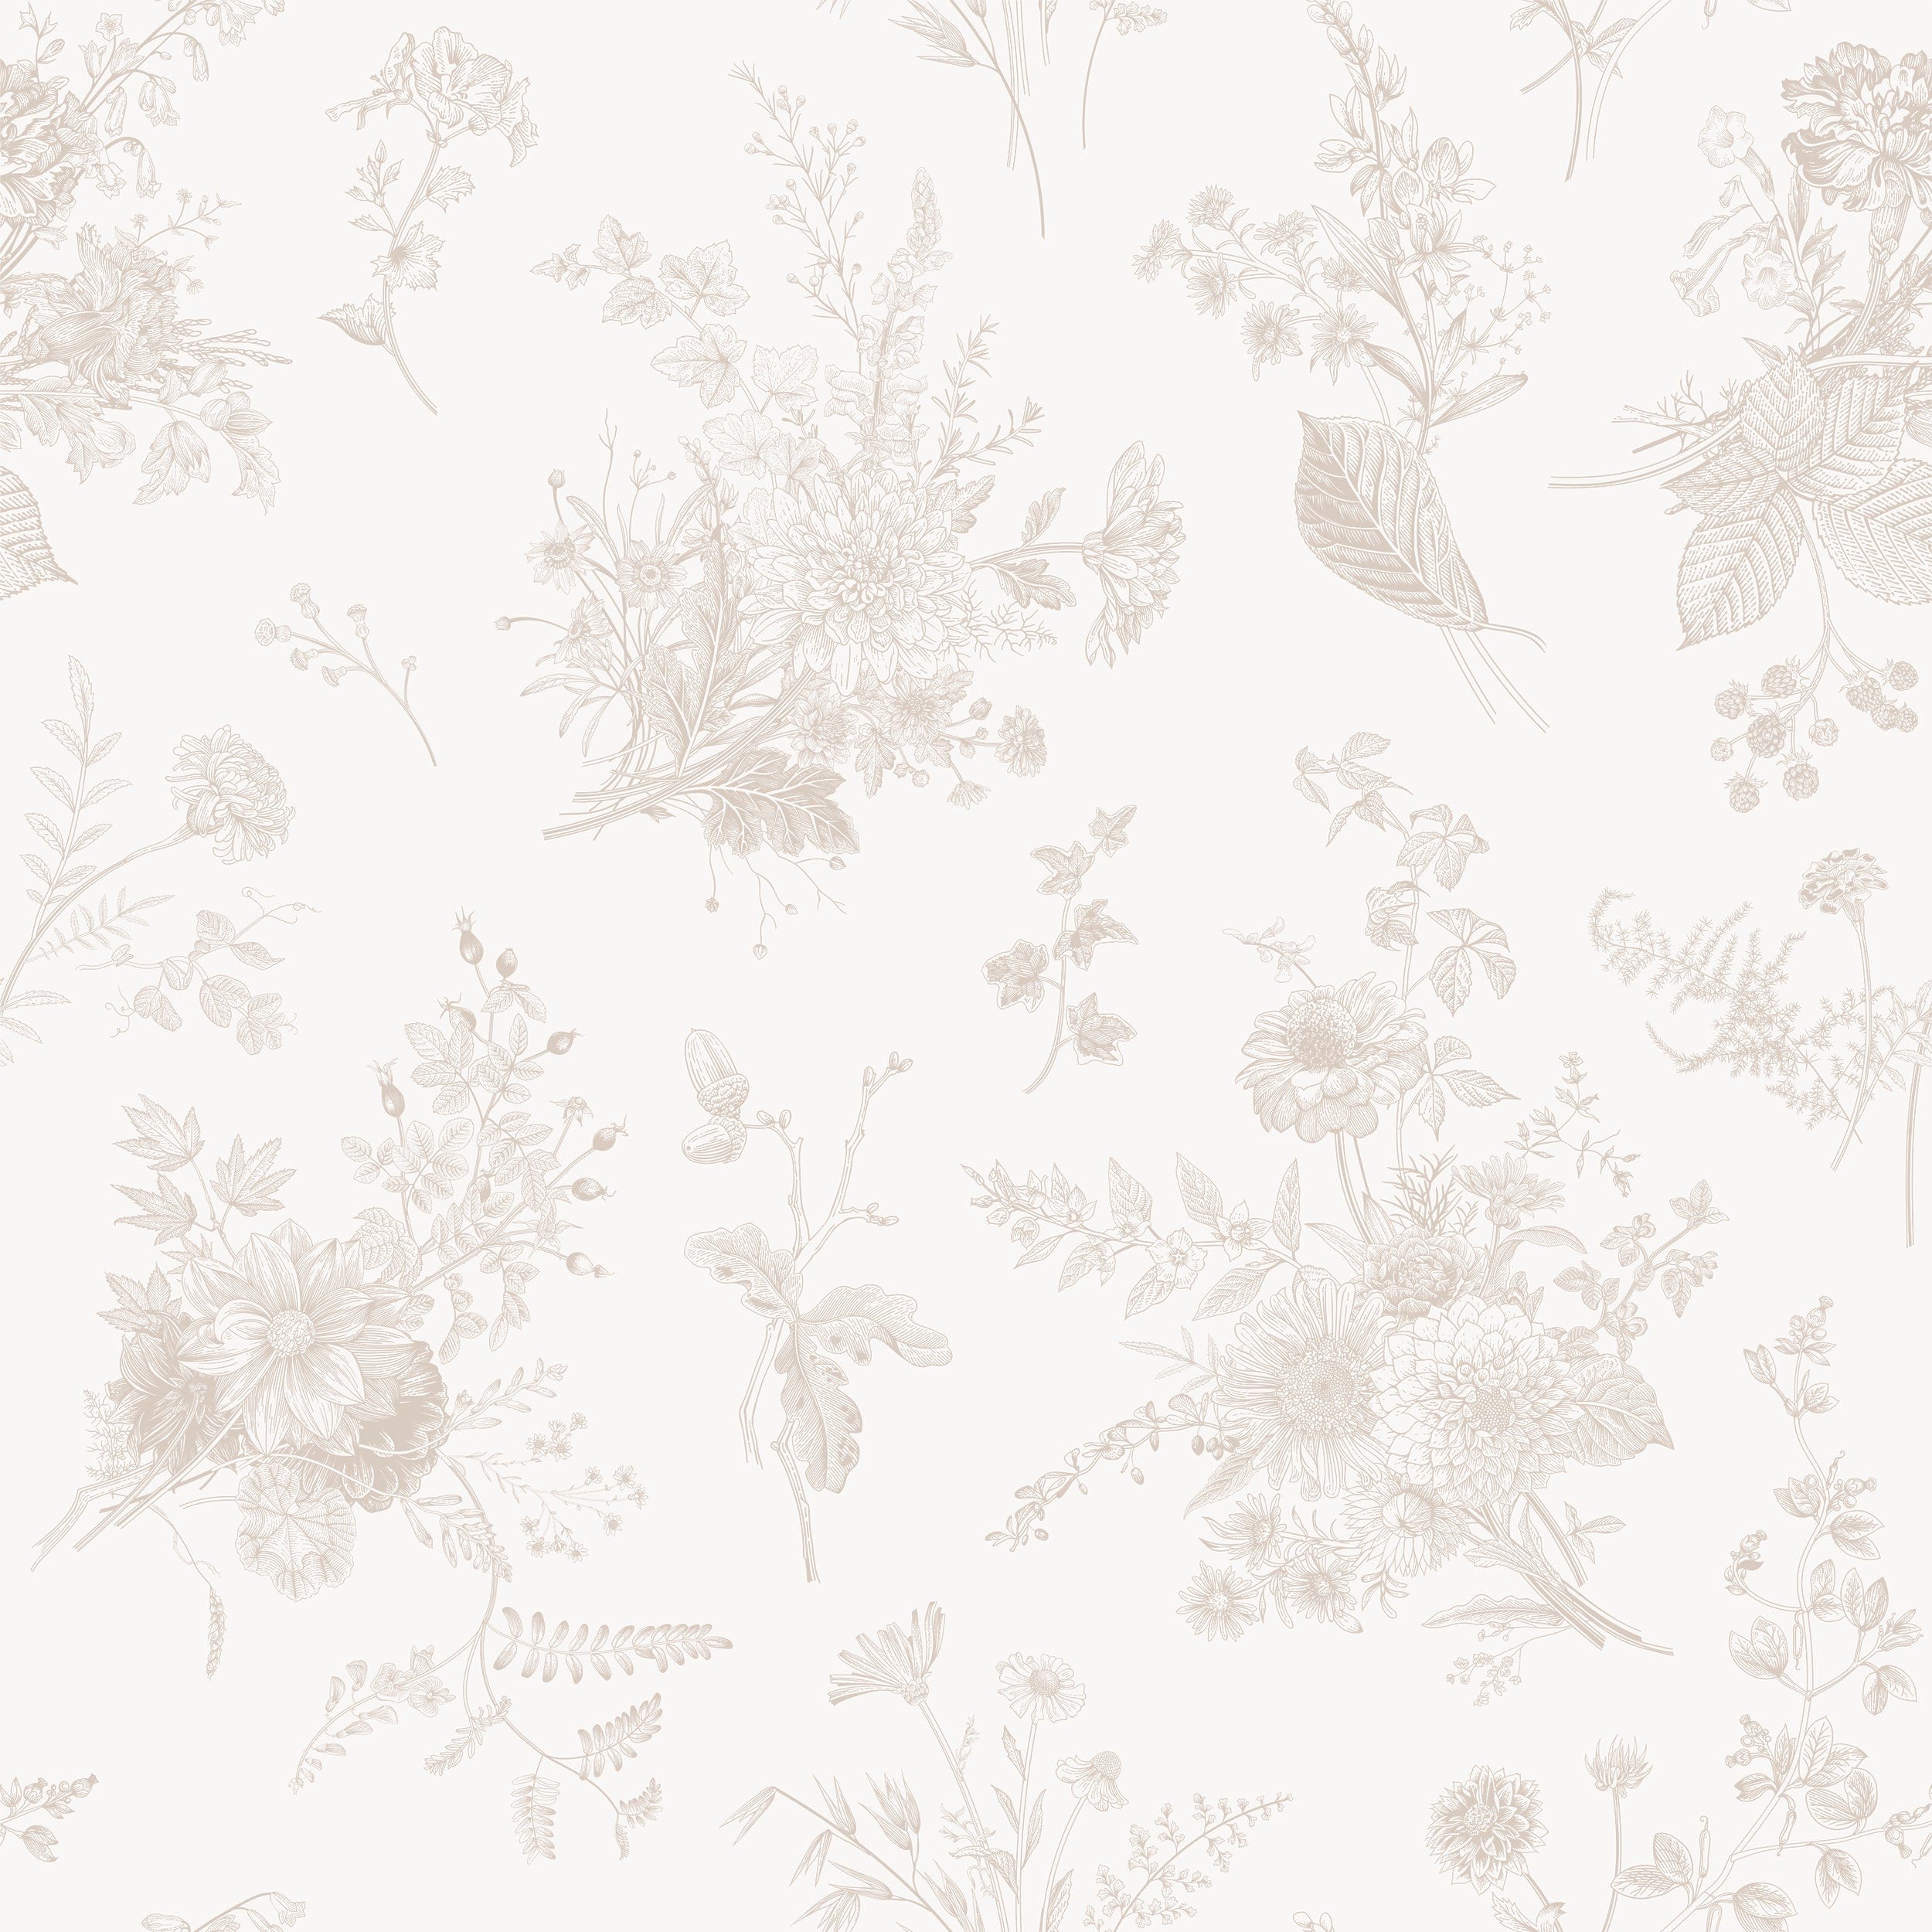 A close-up of the Jouyful Garden Wallpaper, highlighting its intricate and graceful botanical print. The wallpaper displays a dense pattern of various garden plants, leaves, and flowers, all rendered in a delicate line drawing style that creates a tranquil and sophisticated ambience. This detailed view emphasizes the wallpaper's potential to add a touch of refined elegance to any interior space.